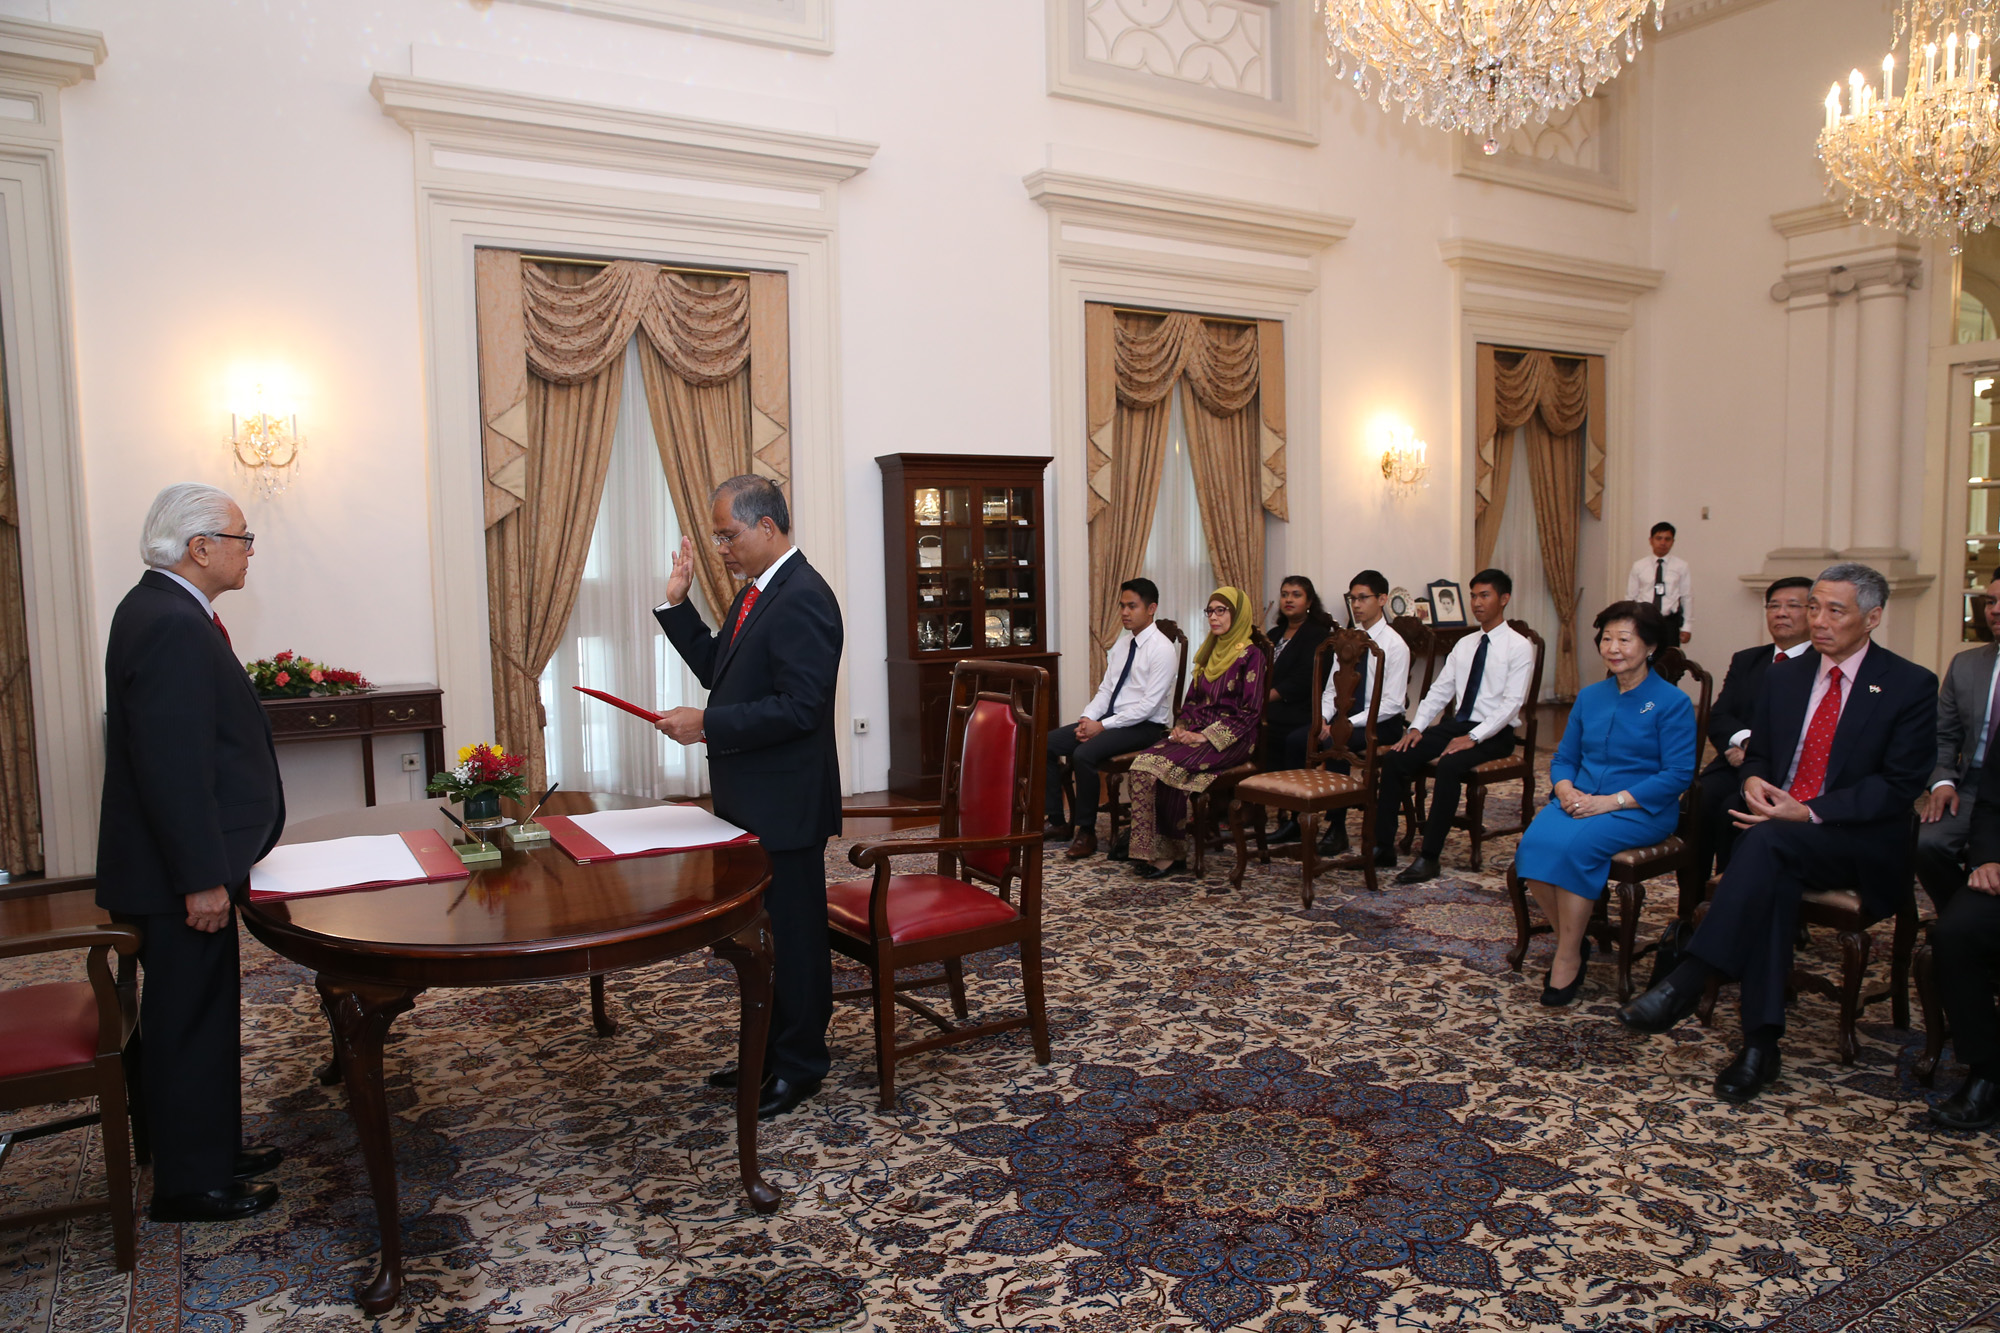 Swearing-in Ceremony for Mr Masagos Zulkifli on 9 April 2015 (MCI Photo by LH Goh)